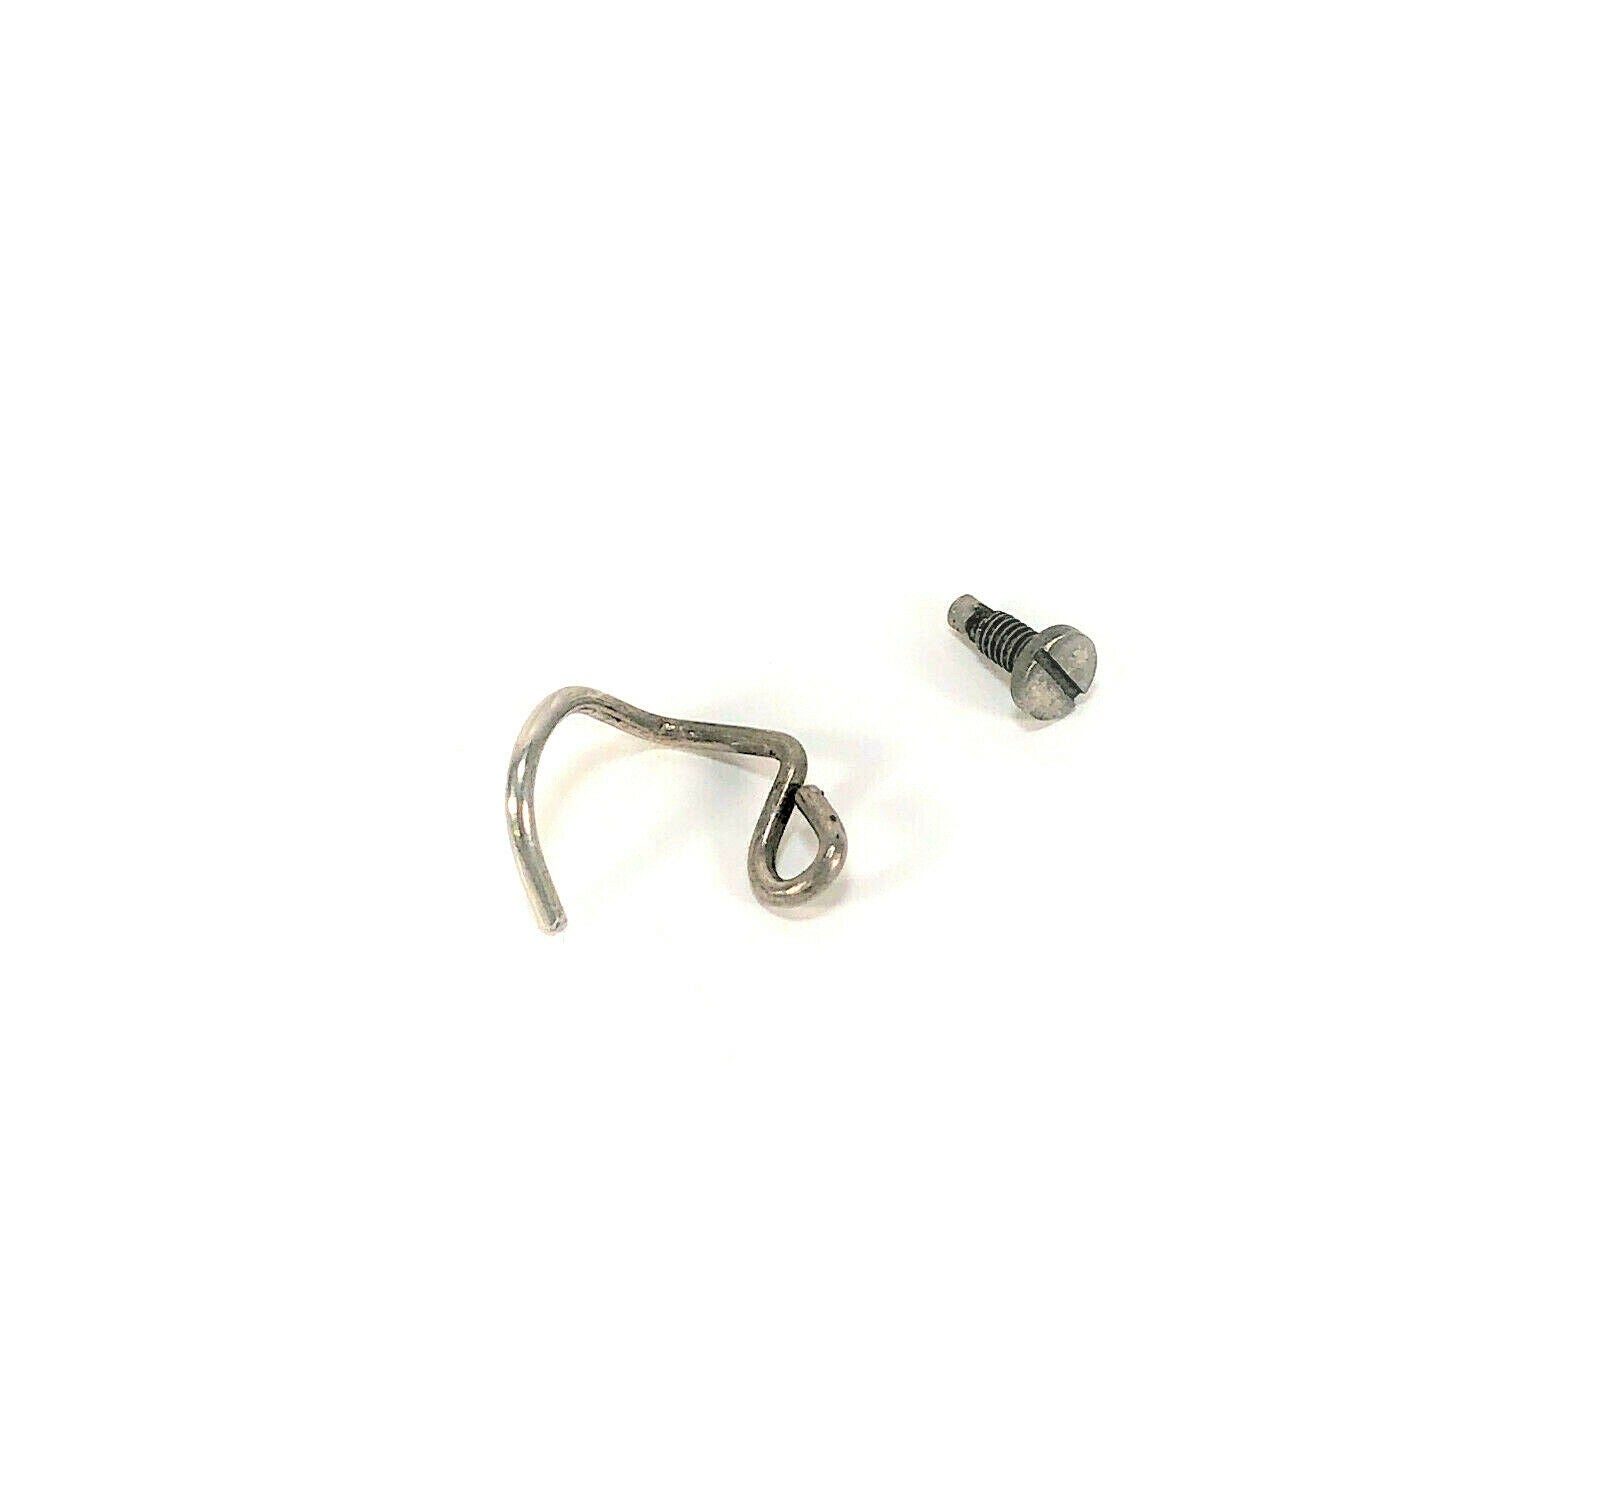 Singer 301 Sewing Machine Upper Thread Guide for Needle Bar Simanco Part  170133